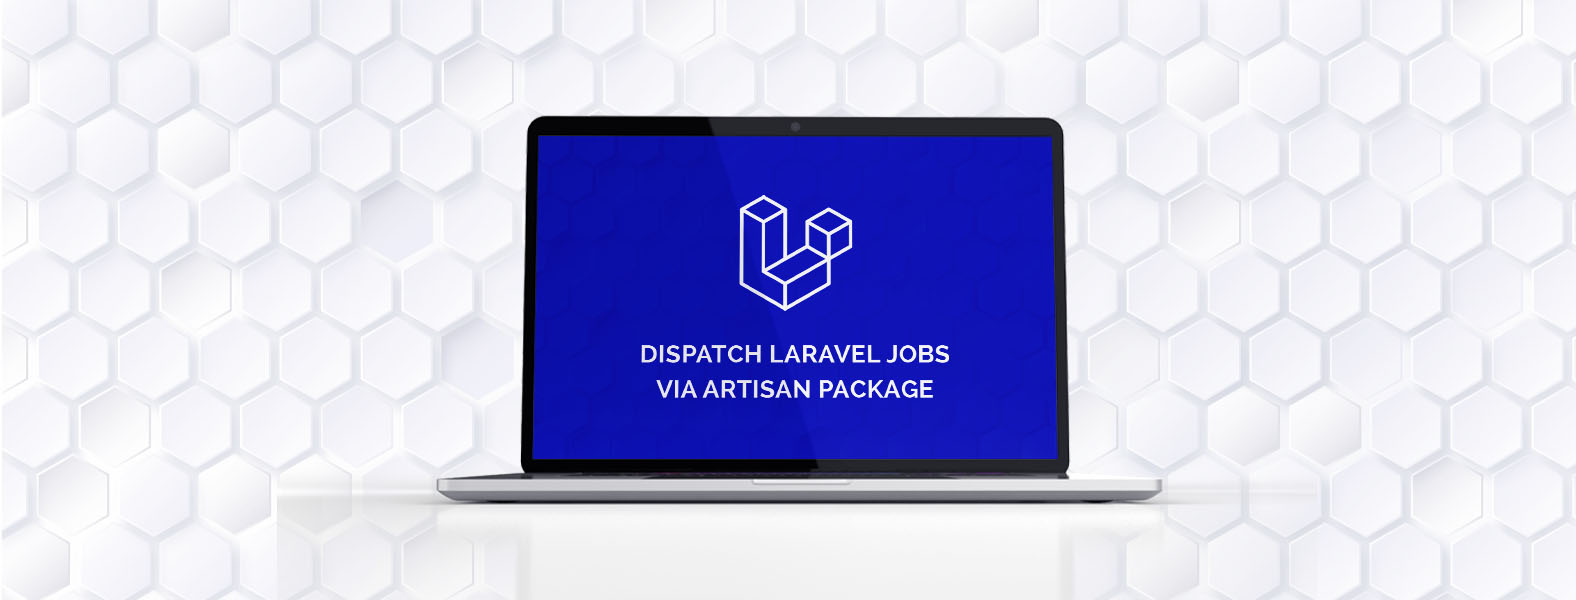 How to Dispatch Laravel Jobs Via Artisan Packages?